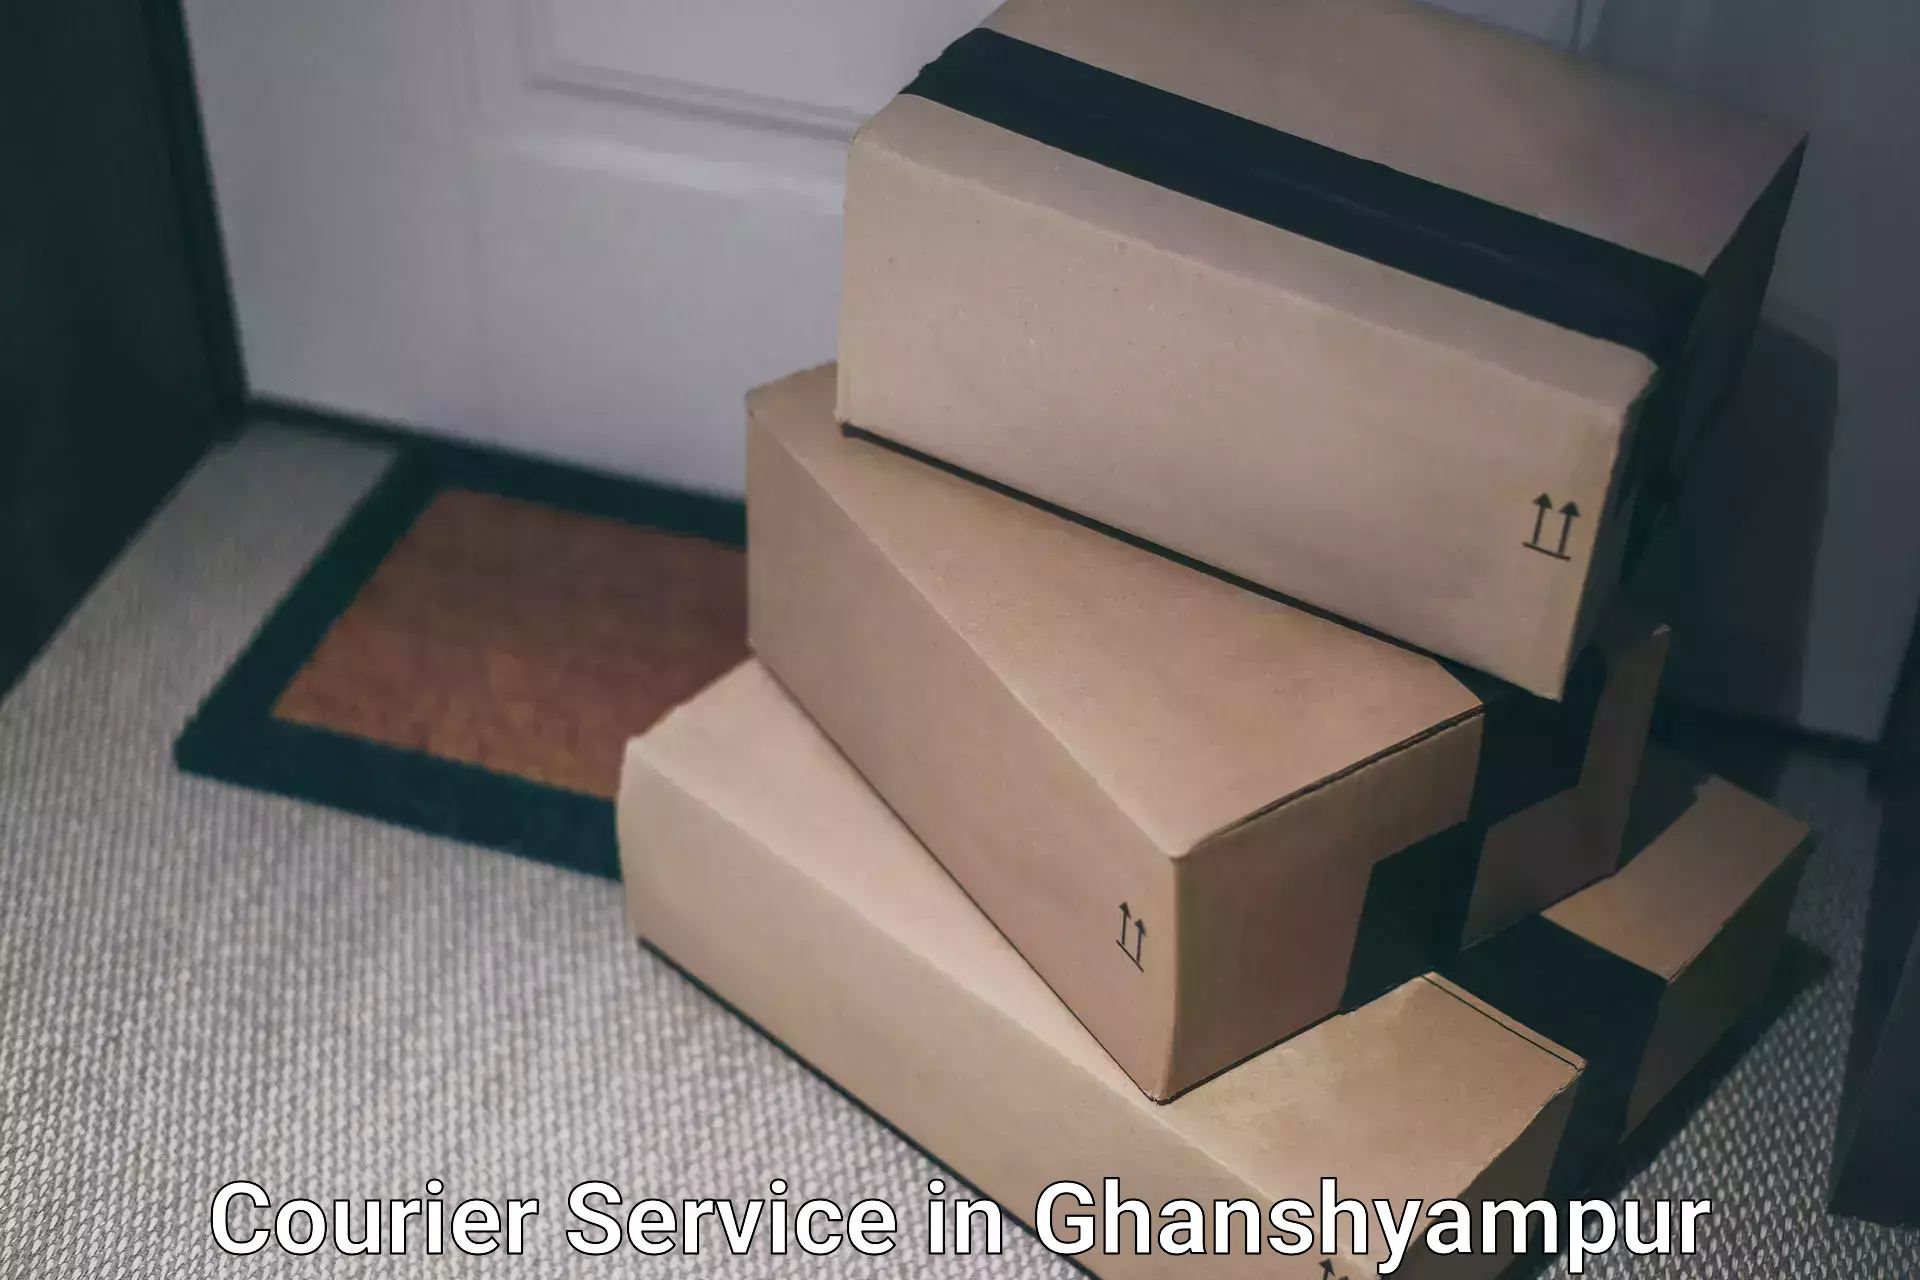 Reliable parcel services in Ghanshyampur